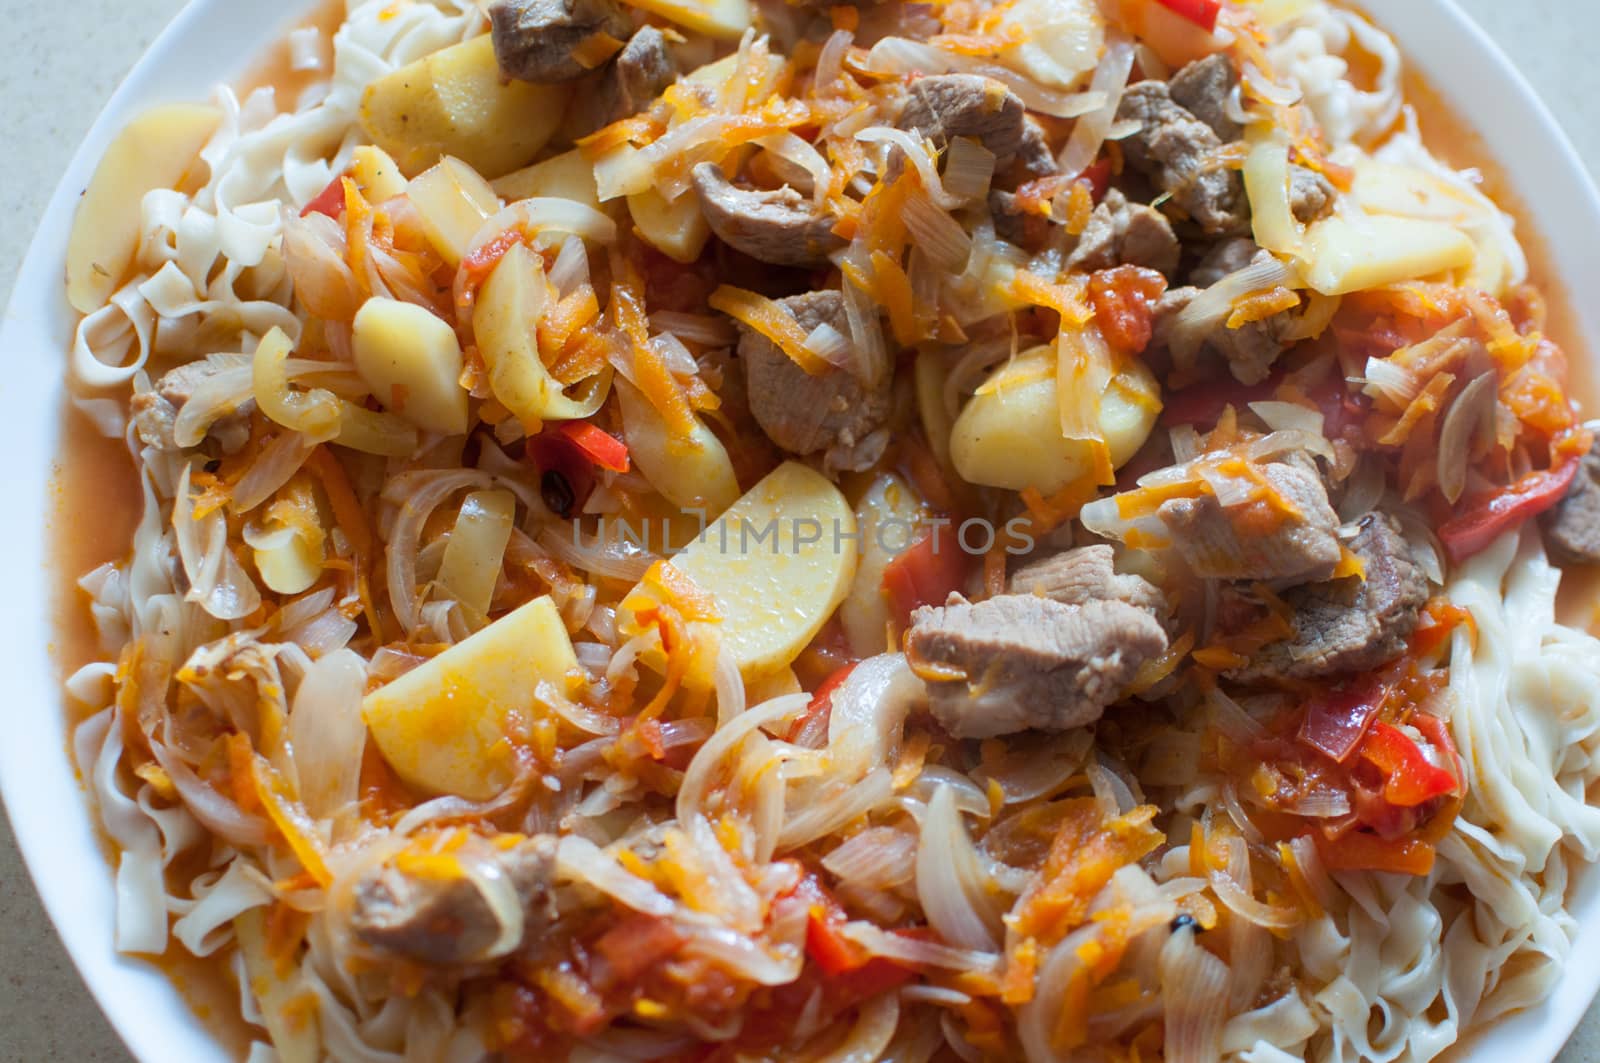 Noodle and meat dish by Linaga